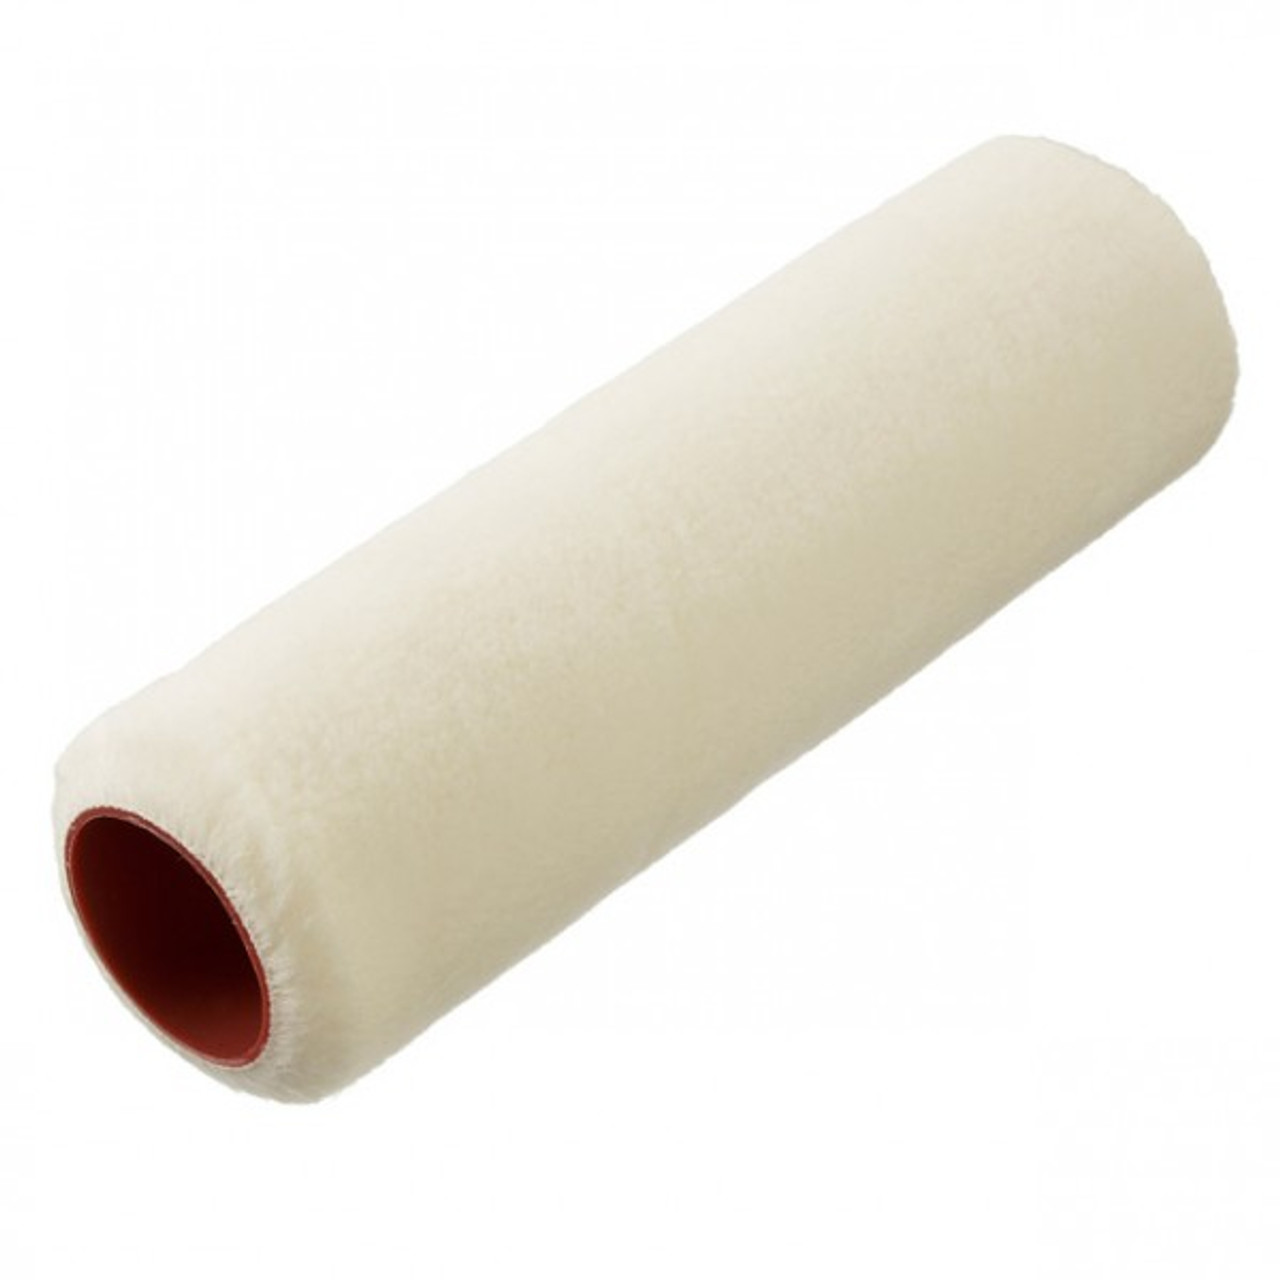 IMPA 510333 SPARE PAINT ROLLER REPLACEMENT 75mm